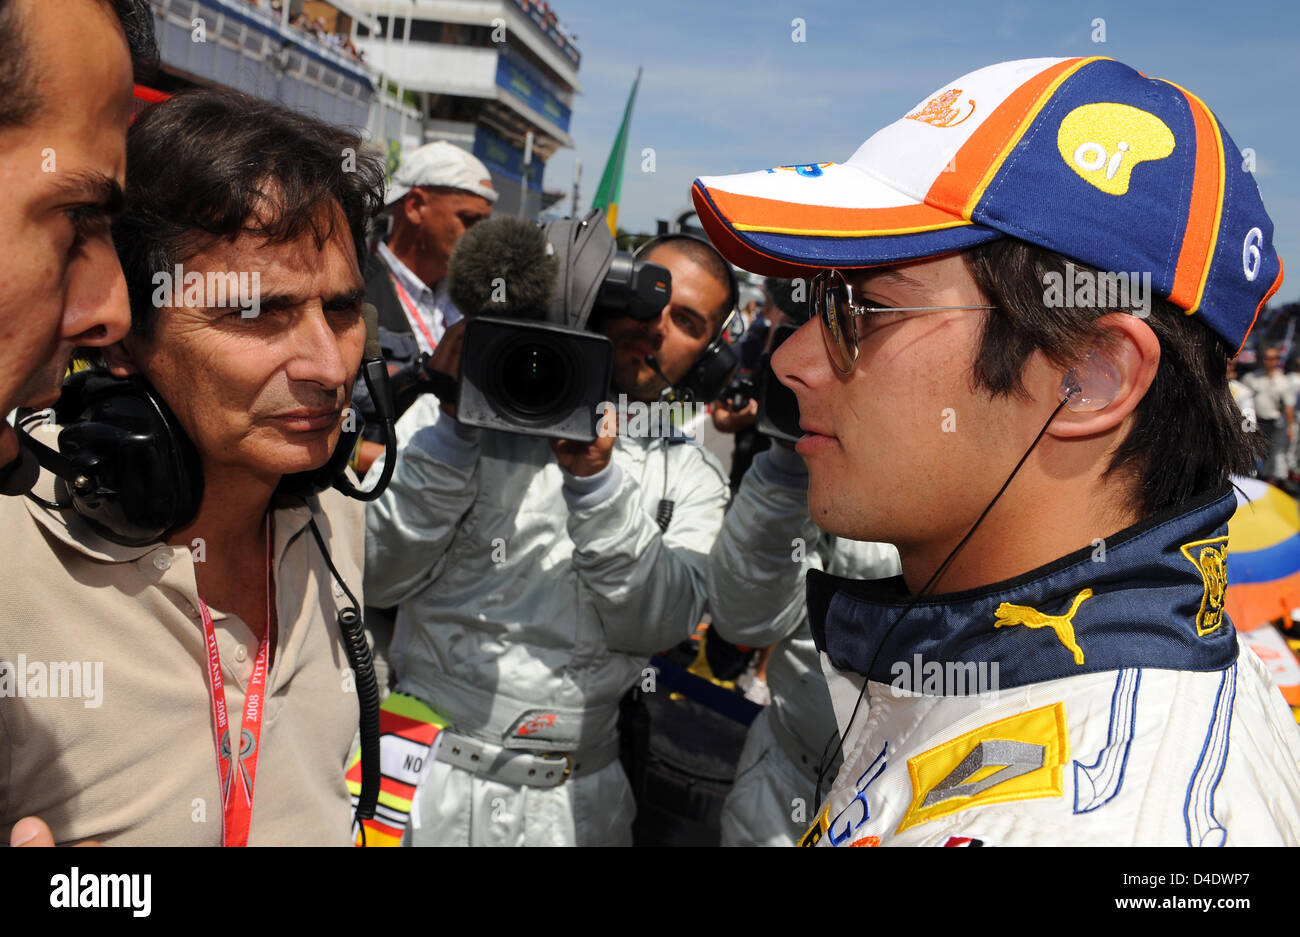 Brazilian Formula One driver Nelson Piquet Junior (R) of Renault talks to his father, former Formula One world champion Nelson Piquet Senior, before the start of the Formula 1 Grand Prix of Spain at Circuit de Catalunya in Montmelo near Barcelona, Spain, 27 April 2008. Photo: GERO BRELOER Stock Photo